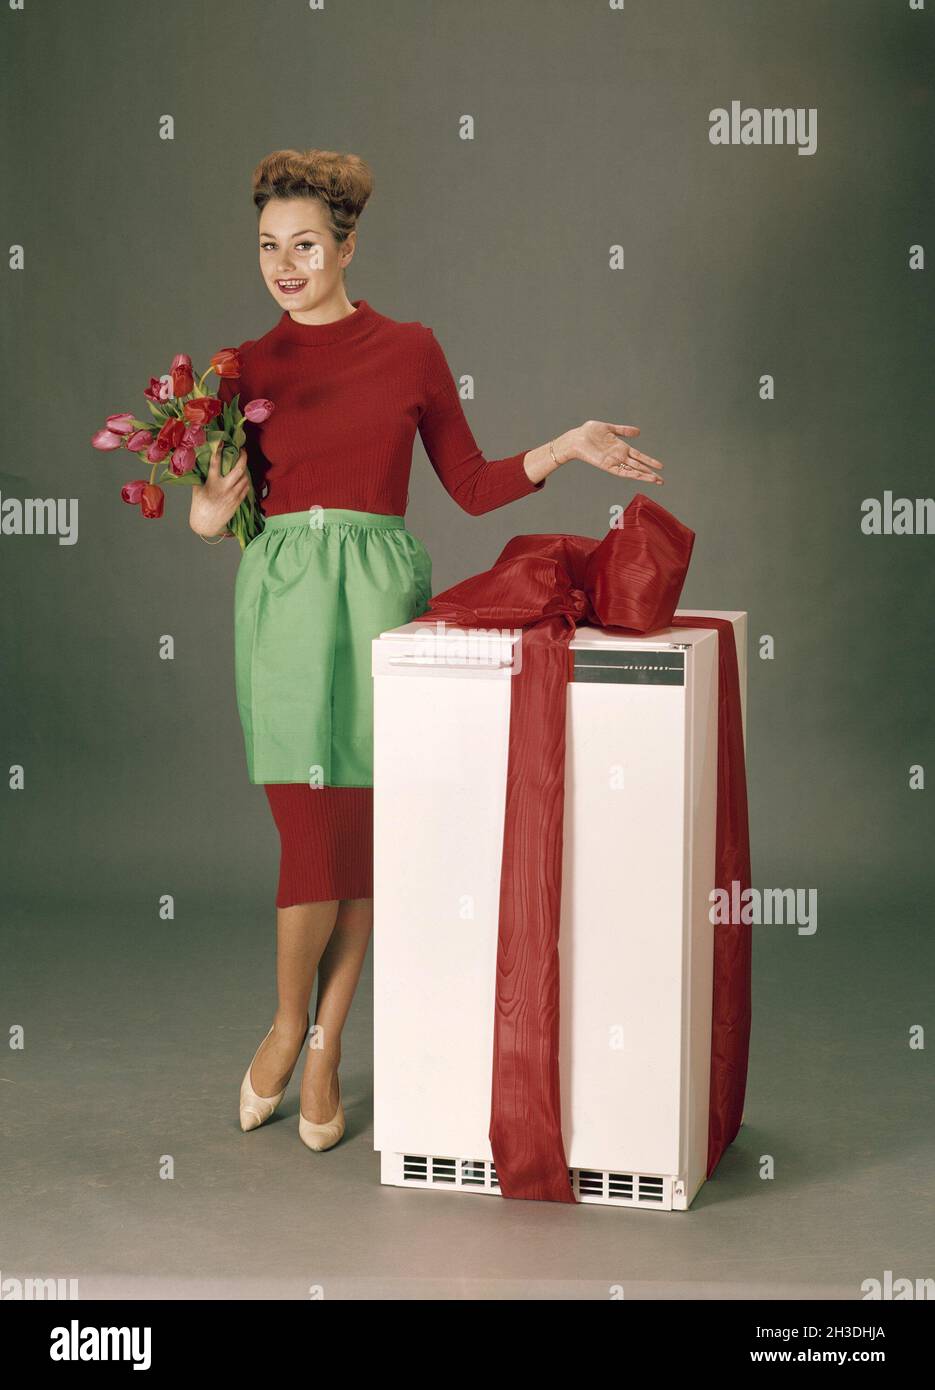 In the 1960s. A woman in a red dress with a green apron is standing beside a refrigerator wrapped in a red ribbon as if she is presenting it as the first price in a competition. Sweden 1960s Stock Photo